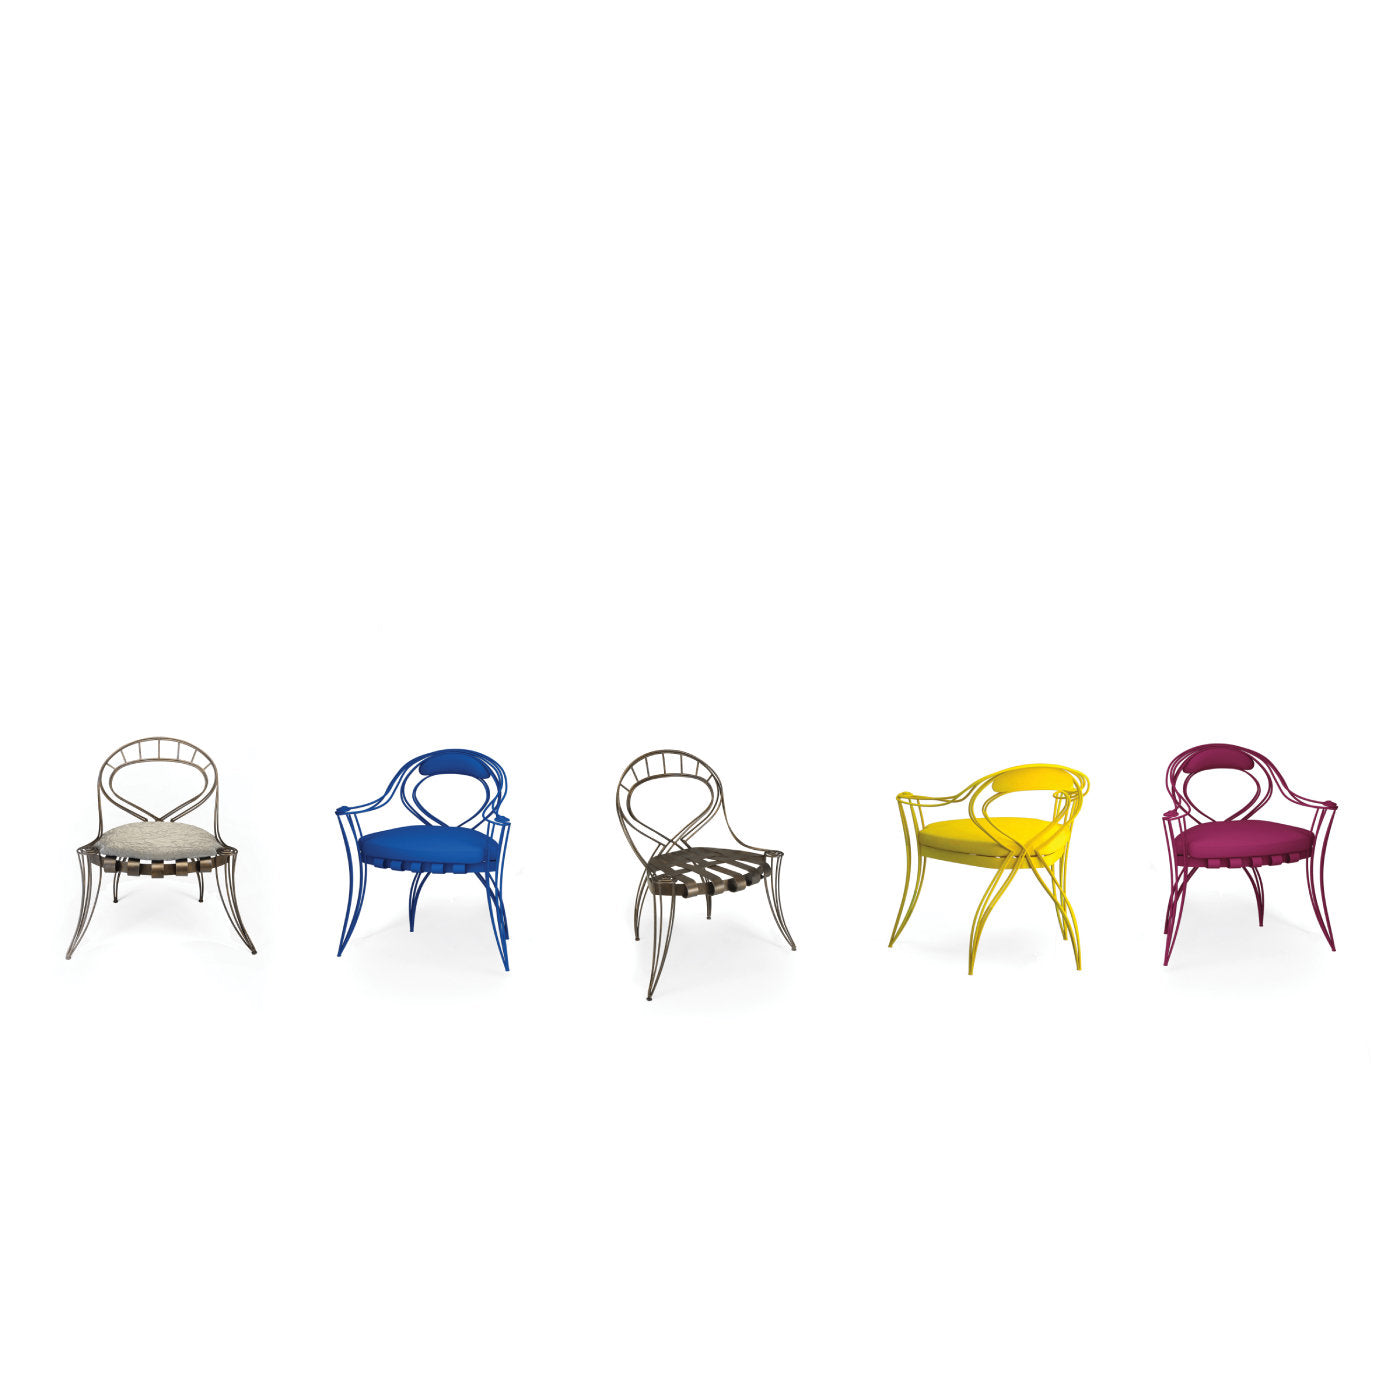 Opus Garden Blue Chair with Armrests by Carlo Rampazzi - Alternative view 2